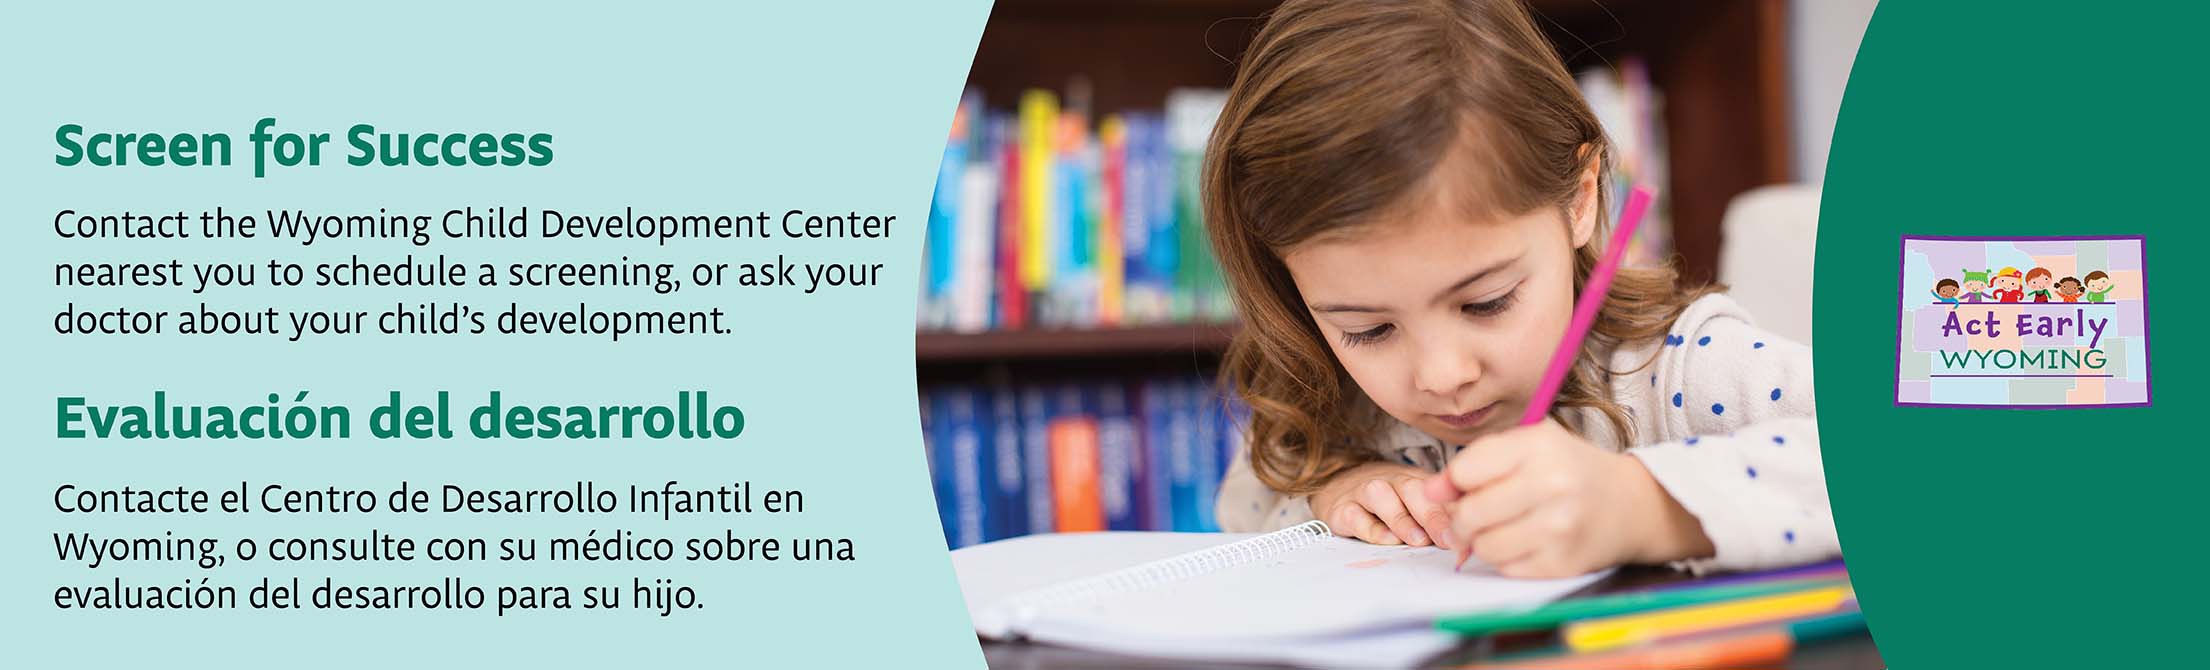 Young girl coloring. Text: Screen for Success. Contact the Wyoming Child Development Center nearest you to schedule a screening, or ask your doctor about your child's development.